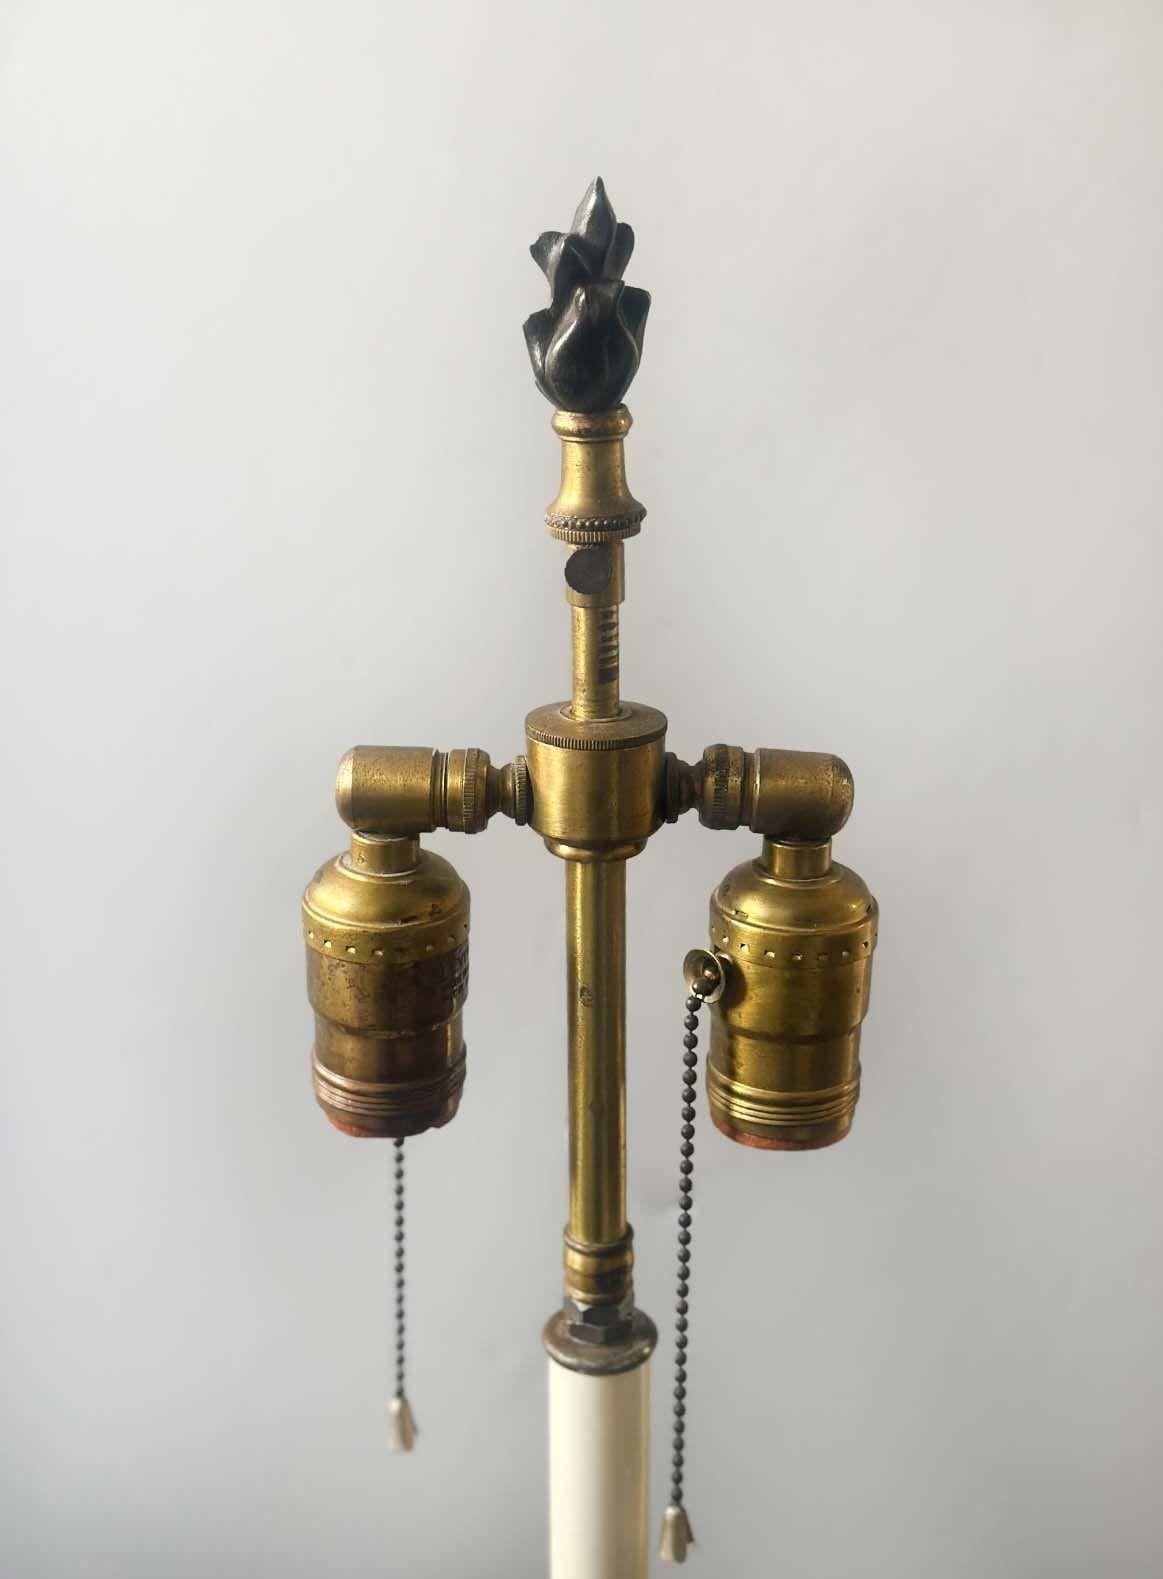 Pair of French 19th Century Empire Style bronze candelabras converted to table lamps, having D'ore bronze and dark patina. They are decorated with ornate foliate details and include footed bases.
*Rewired to fit US lighting